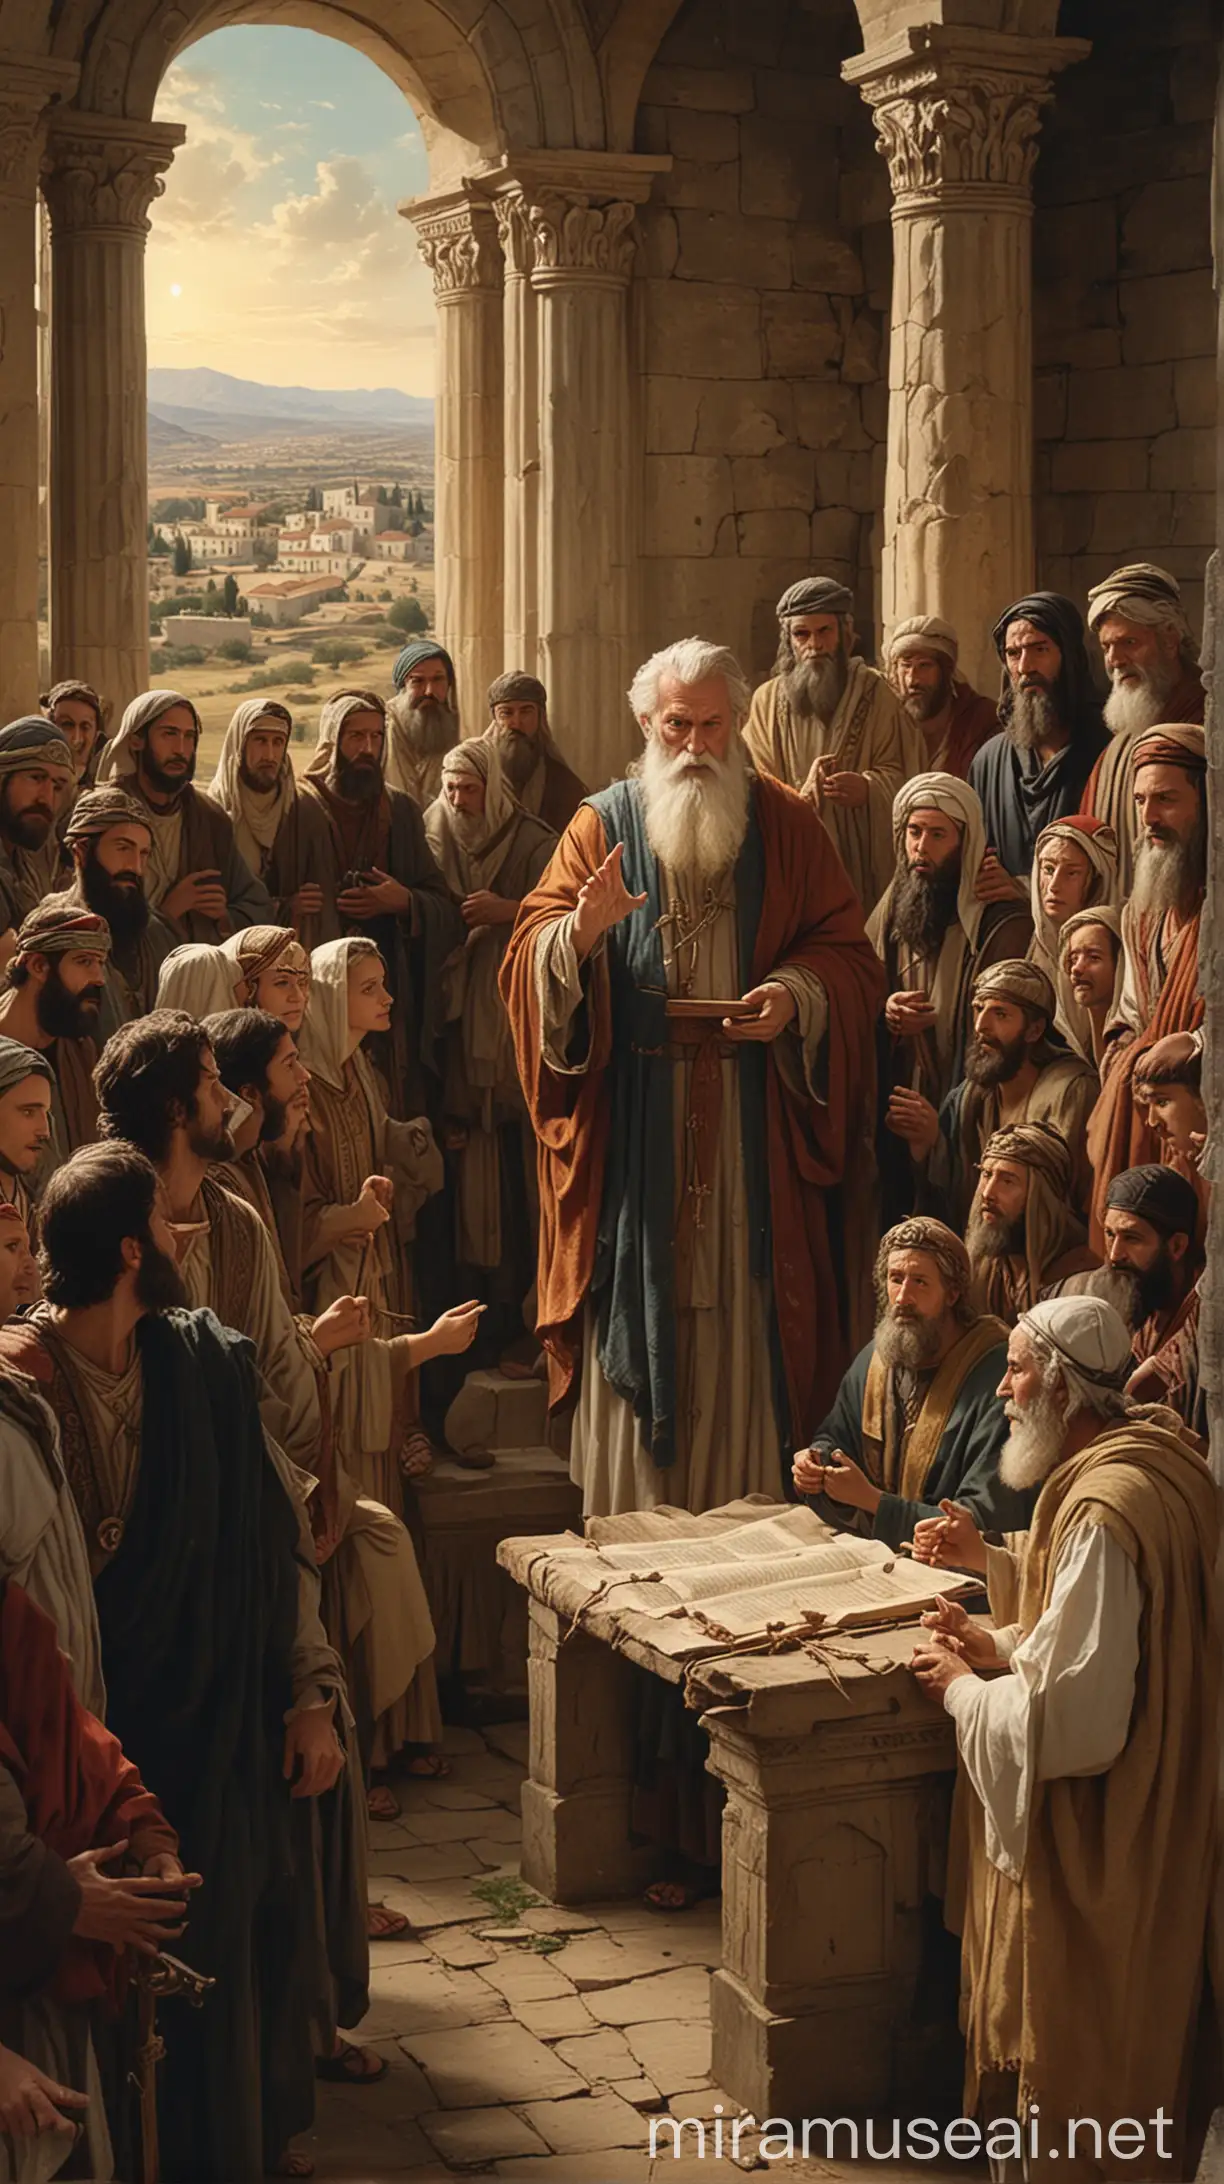 Depict Manaen as an older, wise man, teaching a group of early Christians. The scene should show an ancient church setting in Antioch, with Manaen at the center, holding scrolls or speaking passionately to a diverse group of followers."